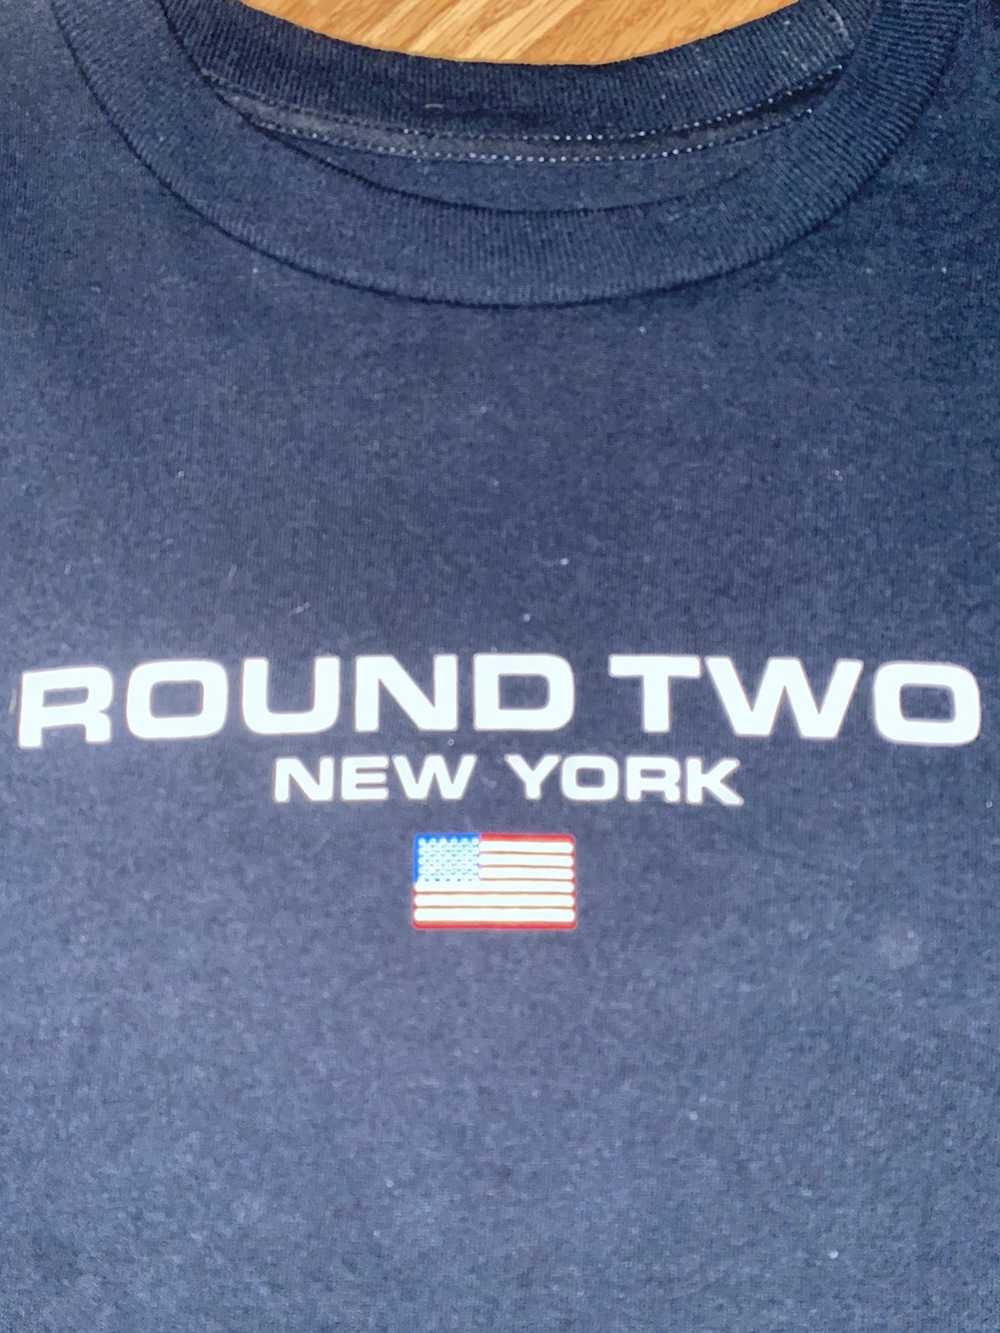 Round Two Round Two NYC Released TShirt - image 2